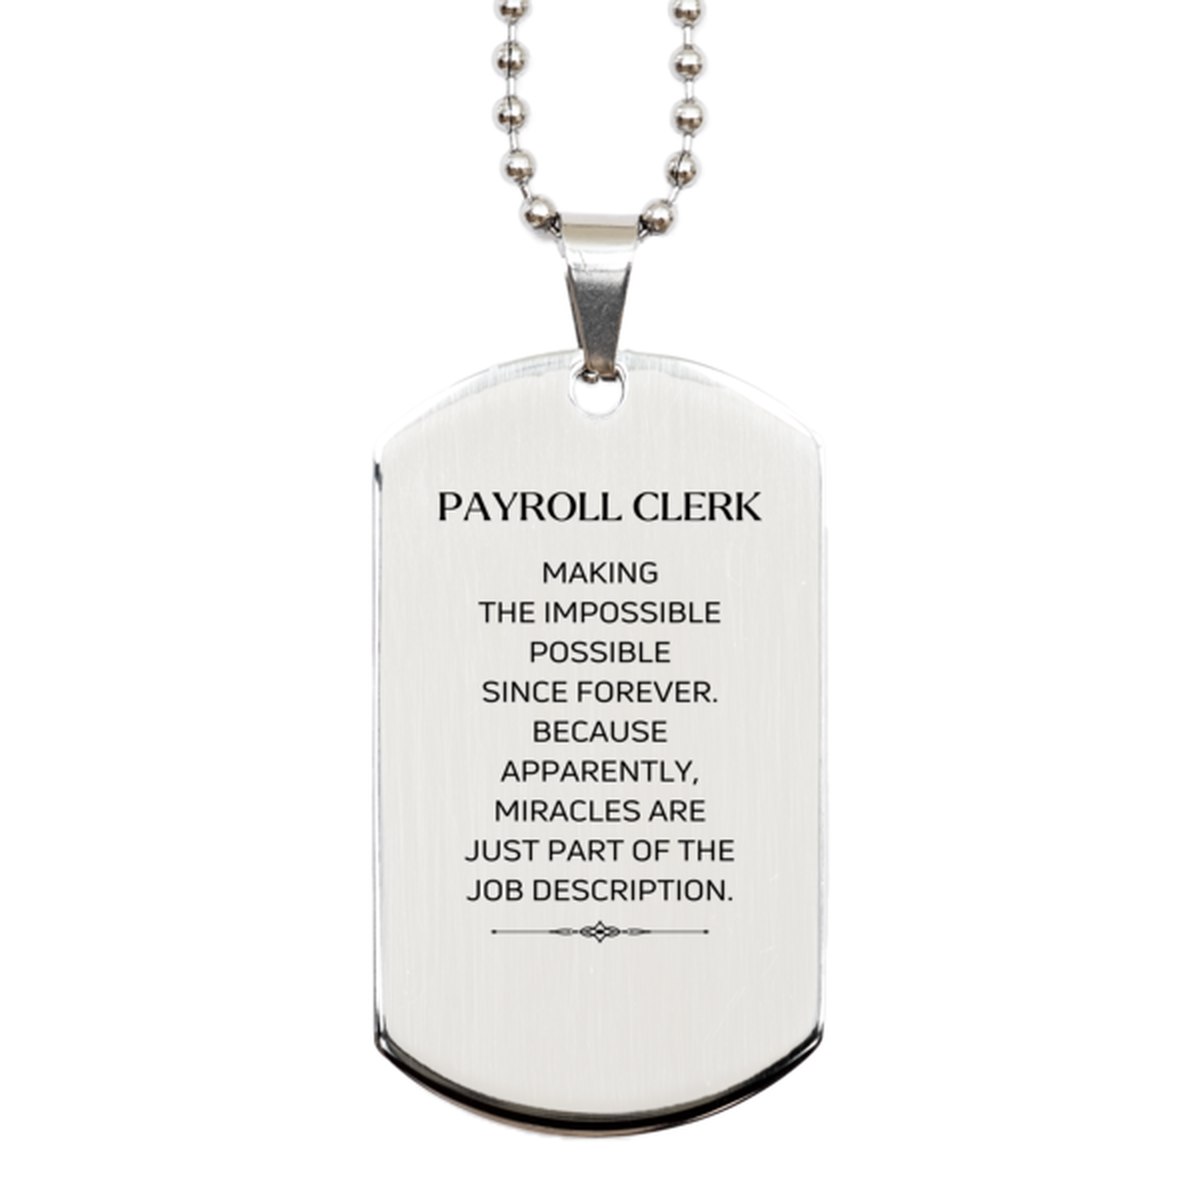 Funny Payroll Clerk Gifts, Miracles are just part of the job description, Inspirational Birthday Silver Dog Tag For Payroll Clerk, Men, Women, Coworkers, Friends, Boss